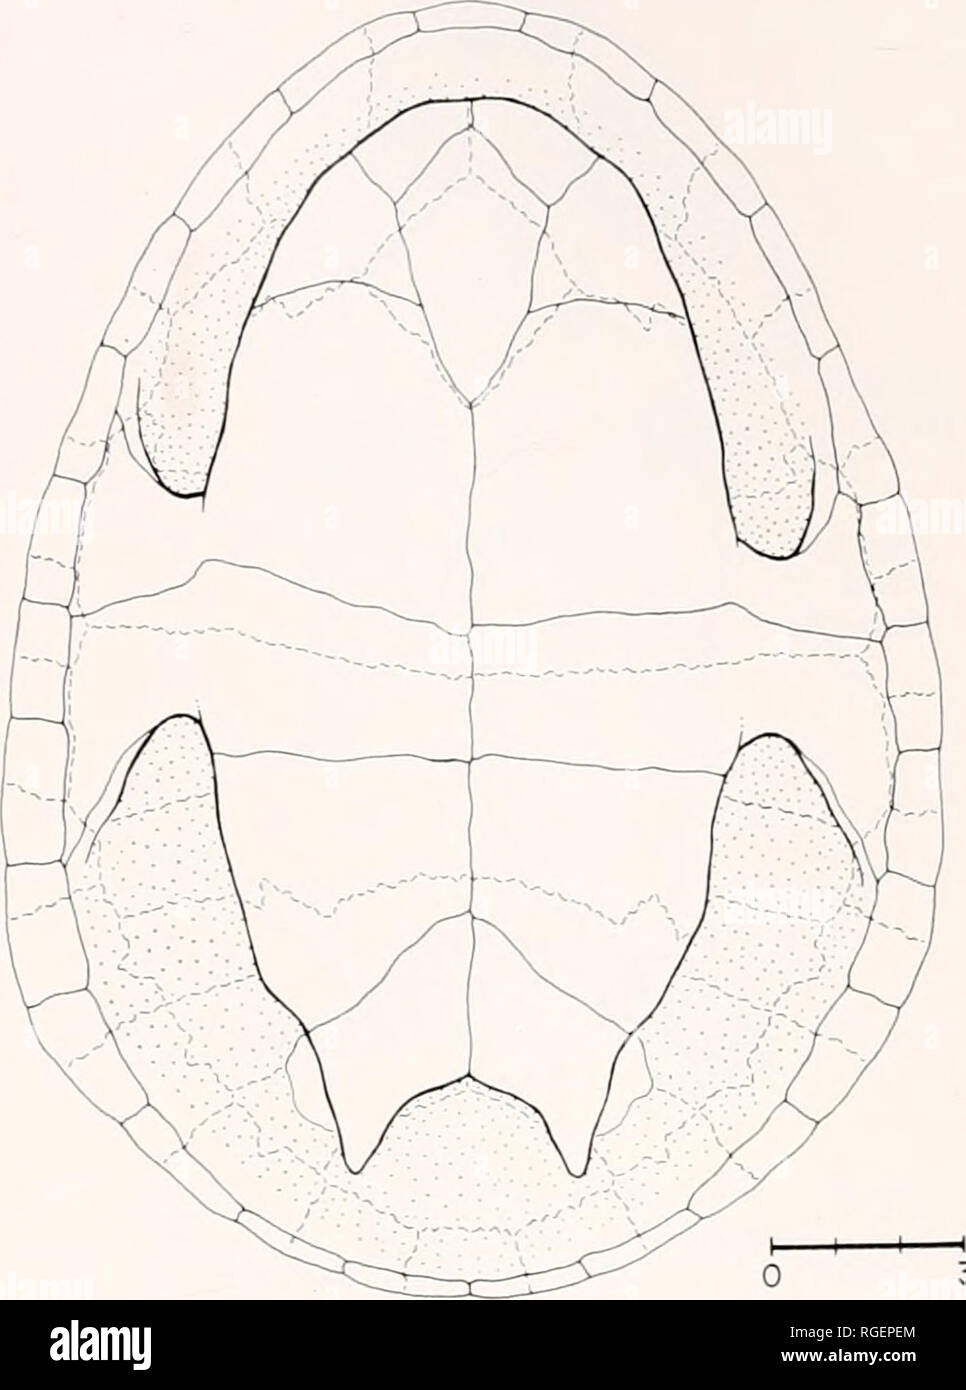 . Bulletin of the Museum of Comparative Zoology at Harvard College. Zoology. 3 cm Figure 2. Dorsal view of the carapace of MCZ 134404, a 203 mm female specimen of C. siebenrocki. Solid lines indicate scute seams, dotted lines bone sutures.. 3 cm Figure 3. Ventral view of C. siebenrocki (MCZ 134404). Note the shape of the anterior plastral lobe and the extent of the anterior ventral marginals. Balumuk: MCZ 134406, 139551; Boze: MCZ 134466; Dam: MCZ 119721; Dorogori: MCZ 118611; Katatai: MCZ 135397-8, 139541-2, 142496-7, AMNH 11164.5-6, AMS 40696-7; Mawatta: MCZ 141288; Saibai: SMNS 3991-1, 3991 Stock Photo